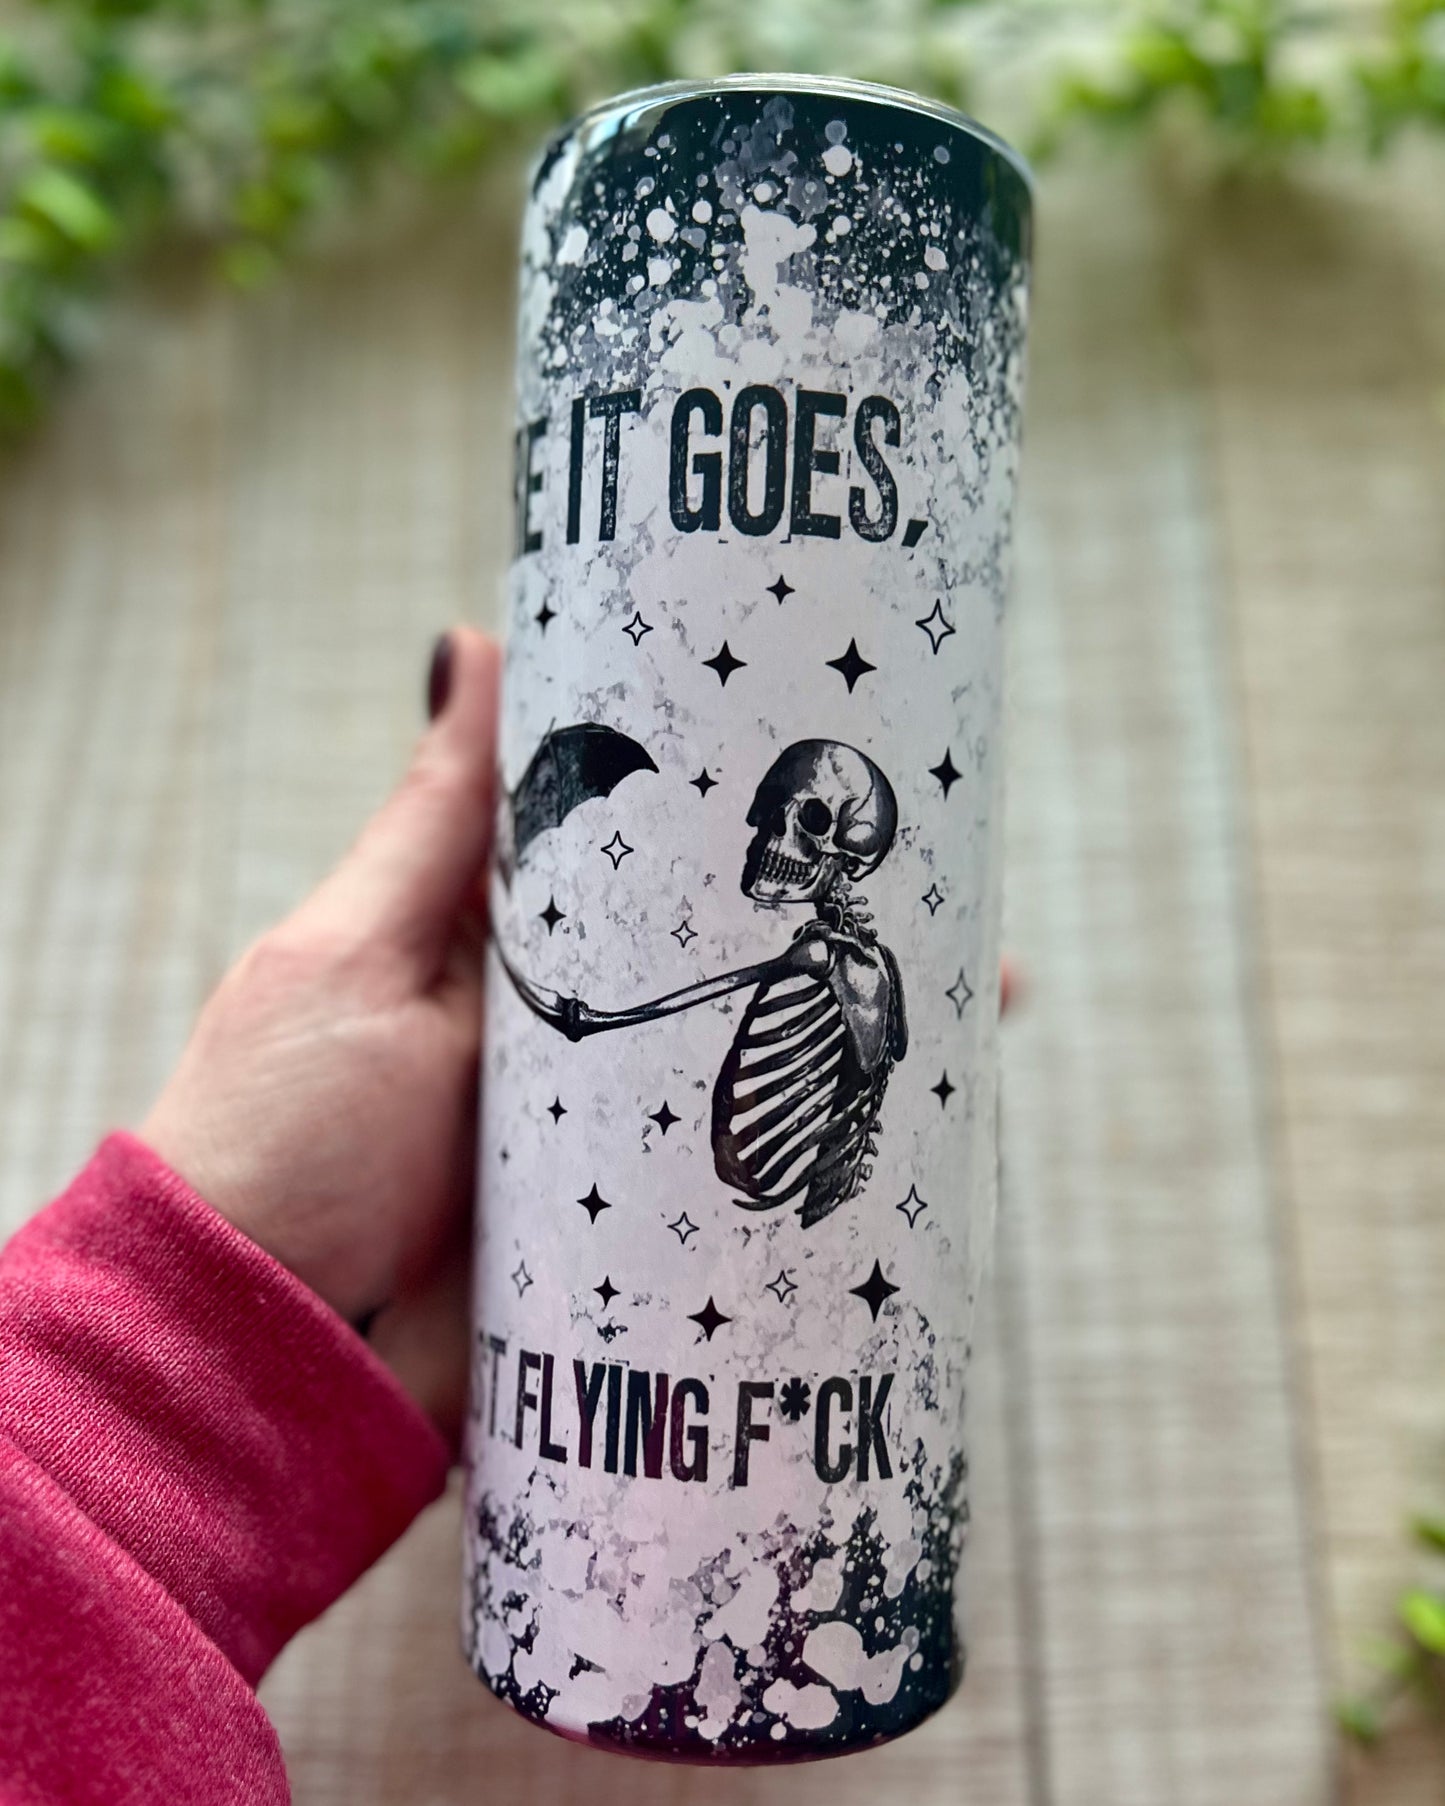 There It Goes, My Last Flying F*ck | 20oz Slim Tumbler